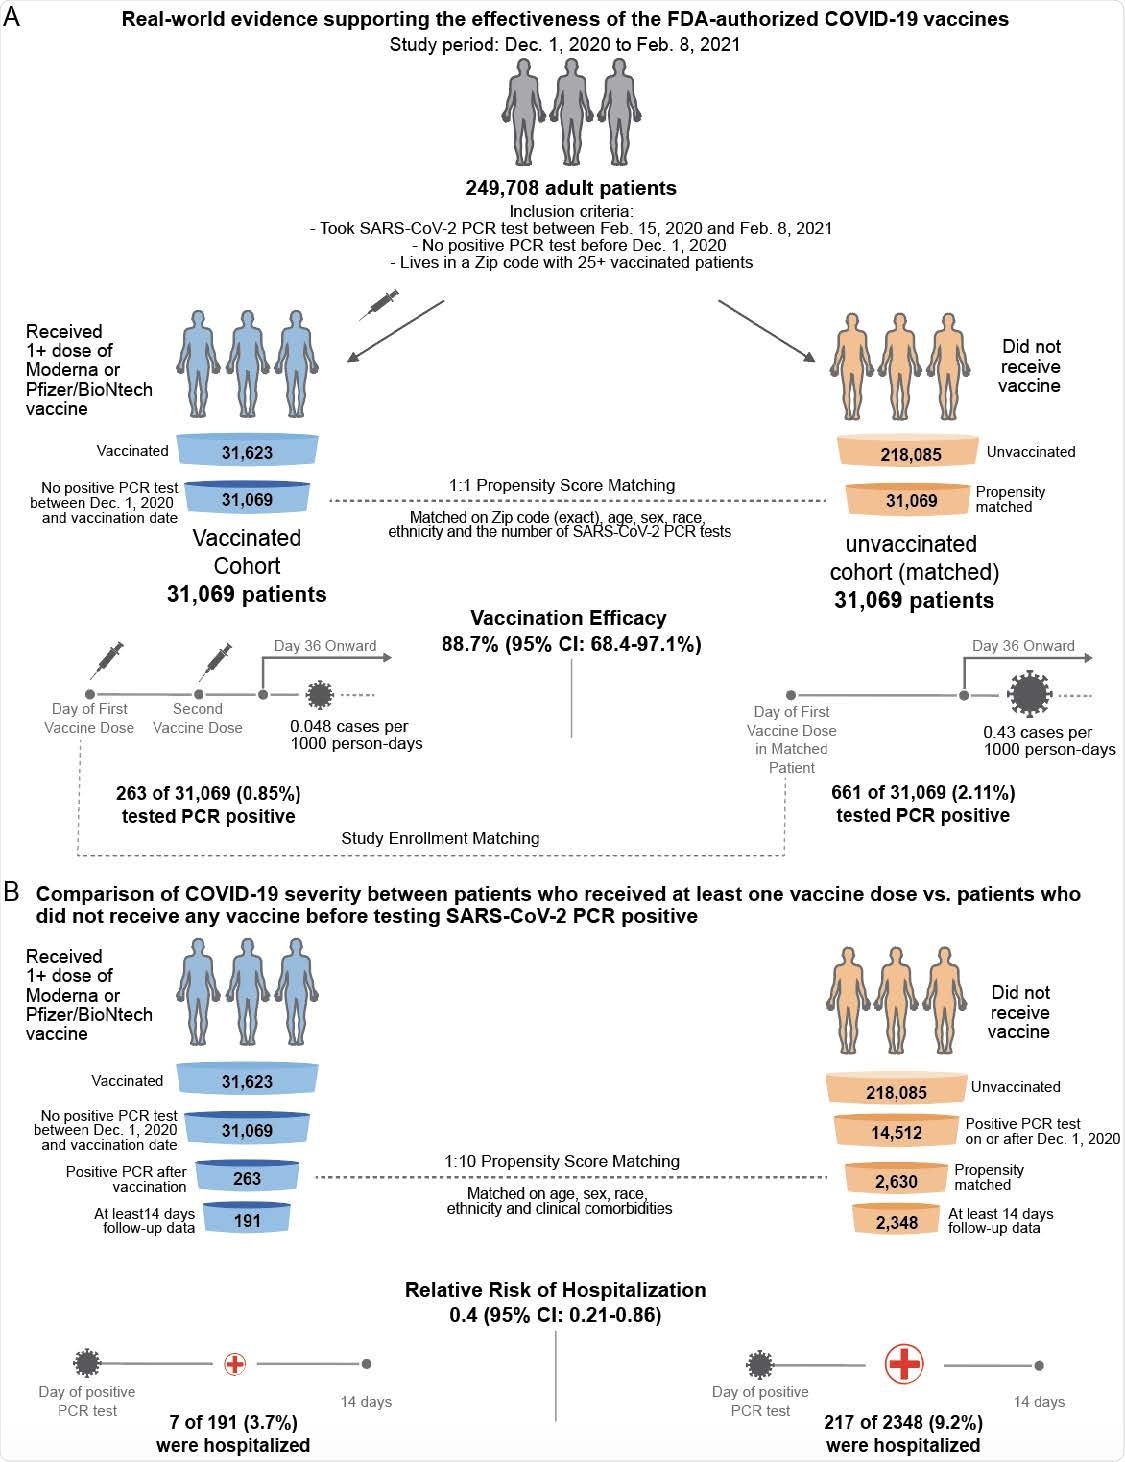 Schematic illustrating the algorithms for participant selection and outcome assessment. (A) Design of study to compare SARS-CoV-2 infection rates in patients receiving COVID-19 vaccination compared to 1-to-1 propensity matched unvaccinated patients (n = 31,069 per group). For each group, incidence rates were calculated to assess the efficacy of vaccination in preventing SARS-CoV-2 infection, as defined by a positive PCR test, with onset at least 36 days after the first dose or the date of study enrollment. Several other time windows were also evaluated for vaccine efficacy. (B) Design of study to compare COVID-19 disease severity in patients who were vaccinated prior to diagnosis with COVID-19 and had at least 14 days of follow-up after diagnosis (n = 191) versus 1-to-10 propensity matched unvaccinated patients with at least 14 days of follow-up (n = 2,348). Severity outcomes (hospitalization, ICU admission, and mortality) were assessed within 14 days of PCR diagnosis.